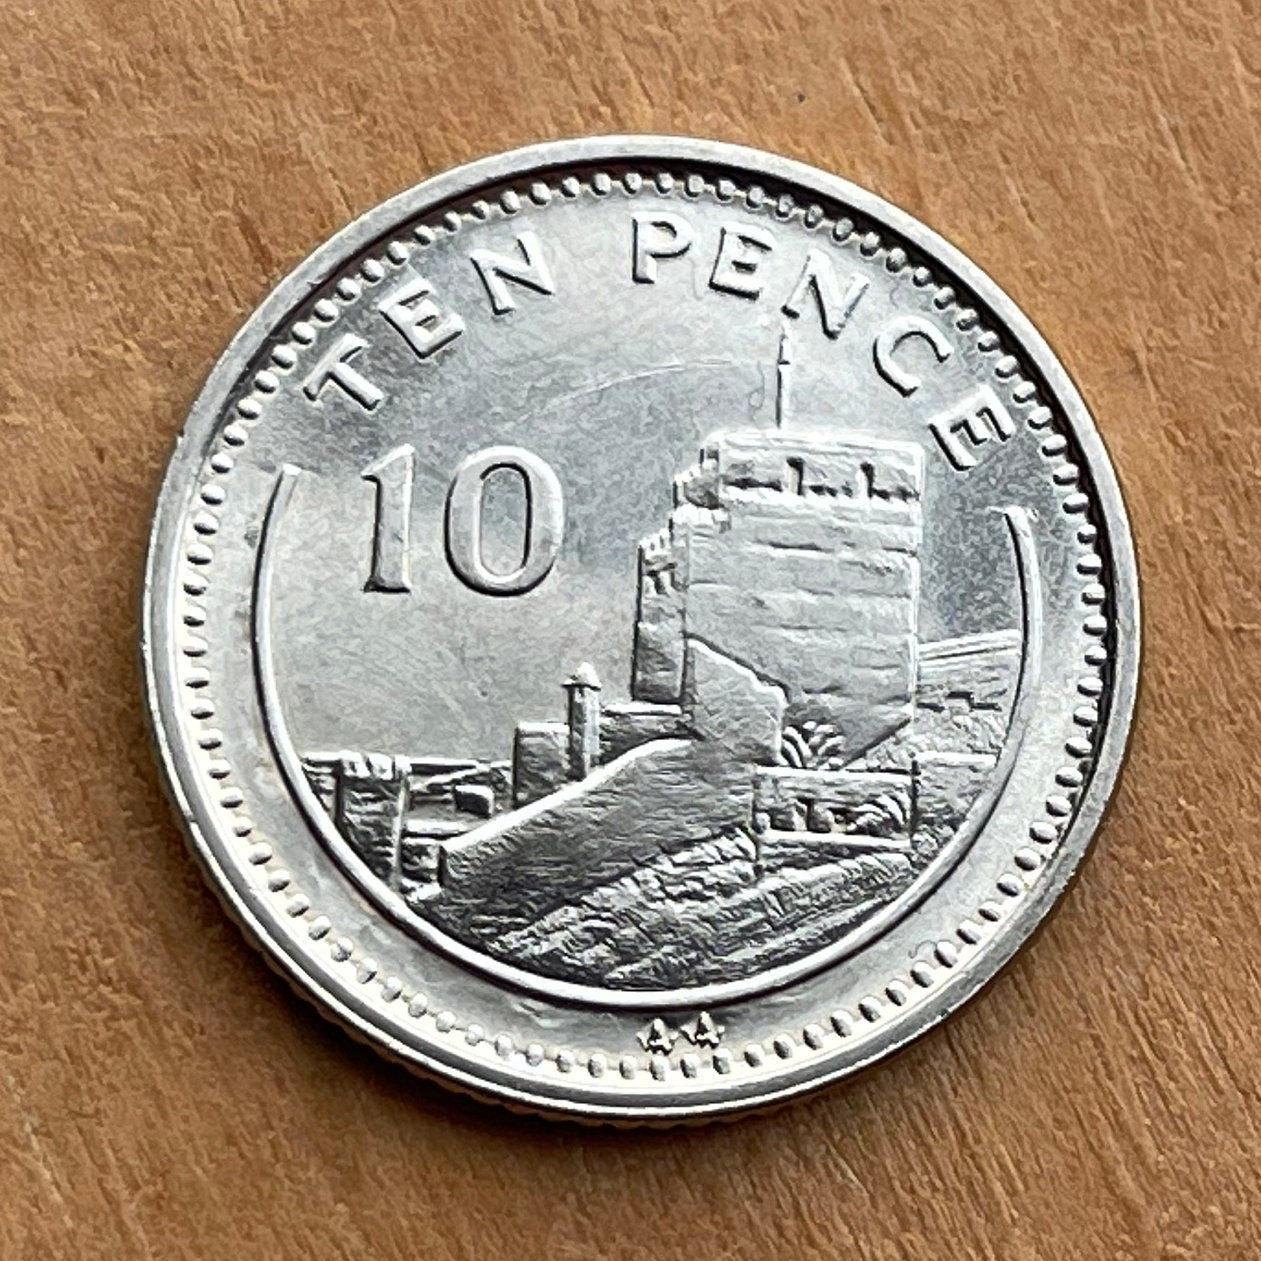 Moorish Castle 10 Pence Gibraltar Authentic Coin Money for Jewelry and Craft Making (Tower of Homage) (1994)